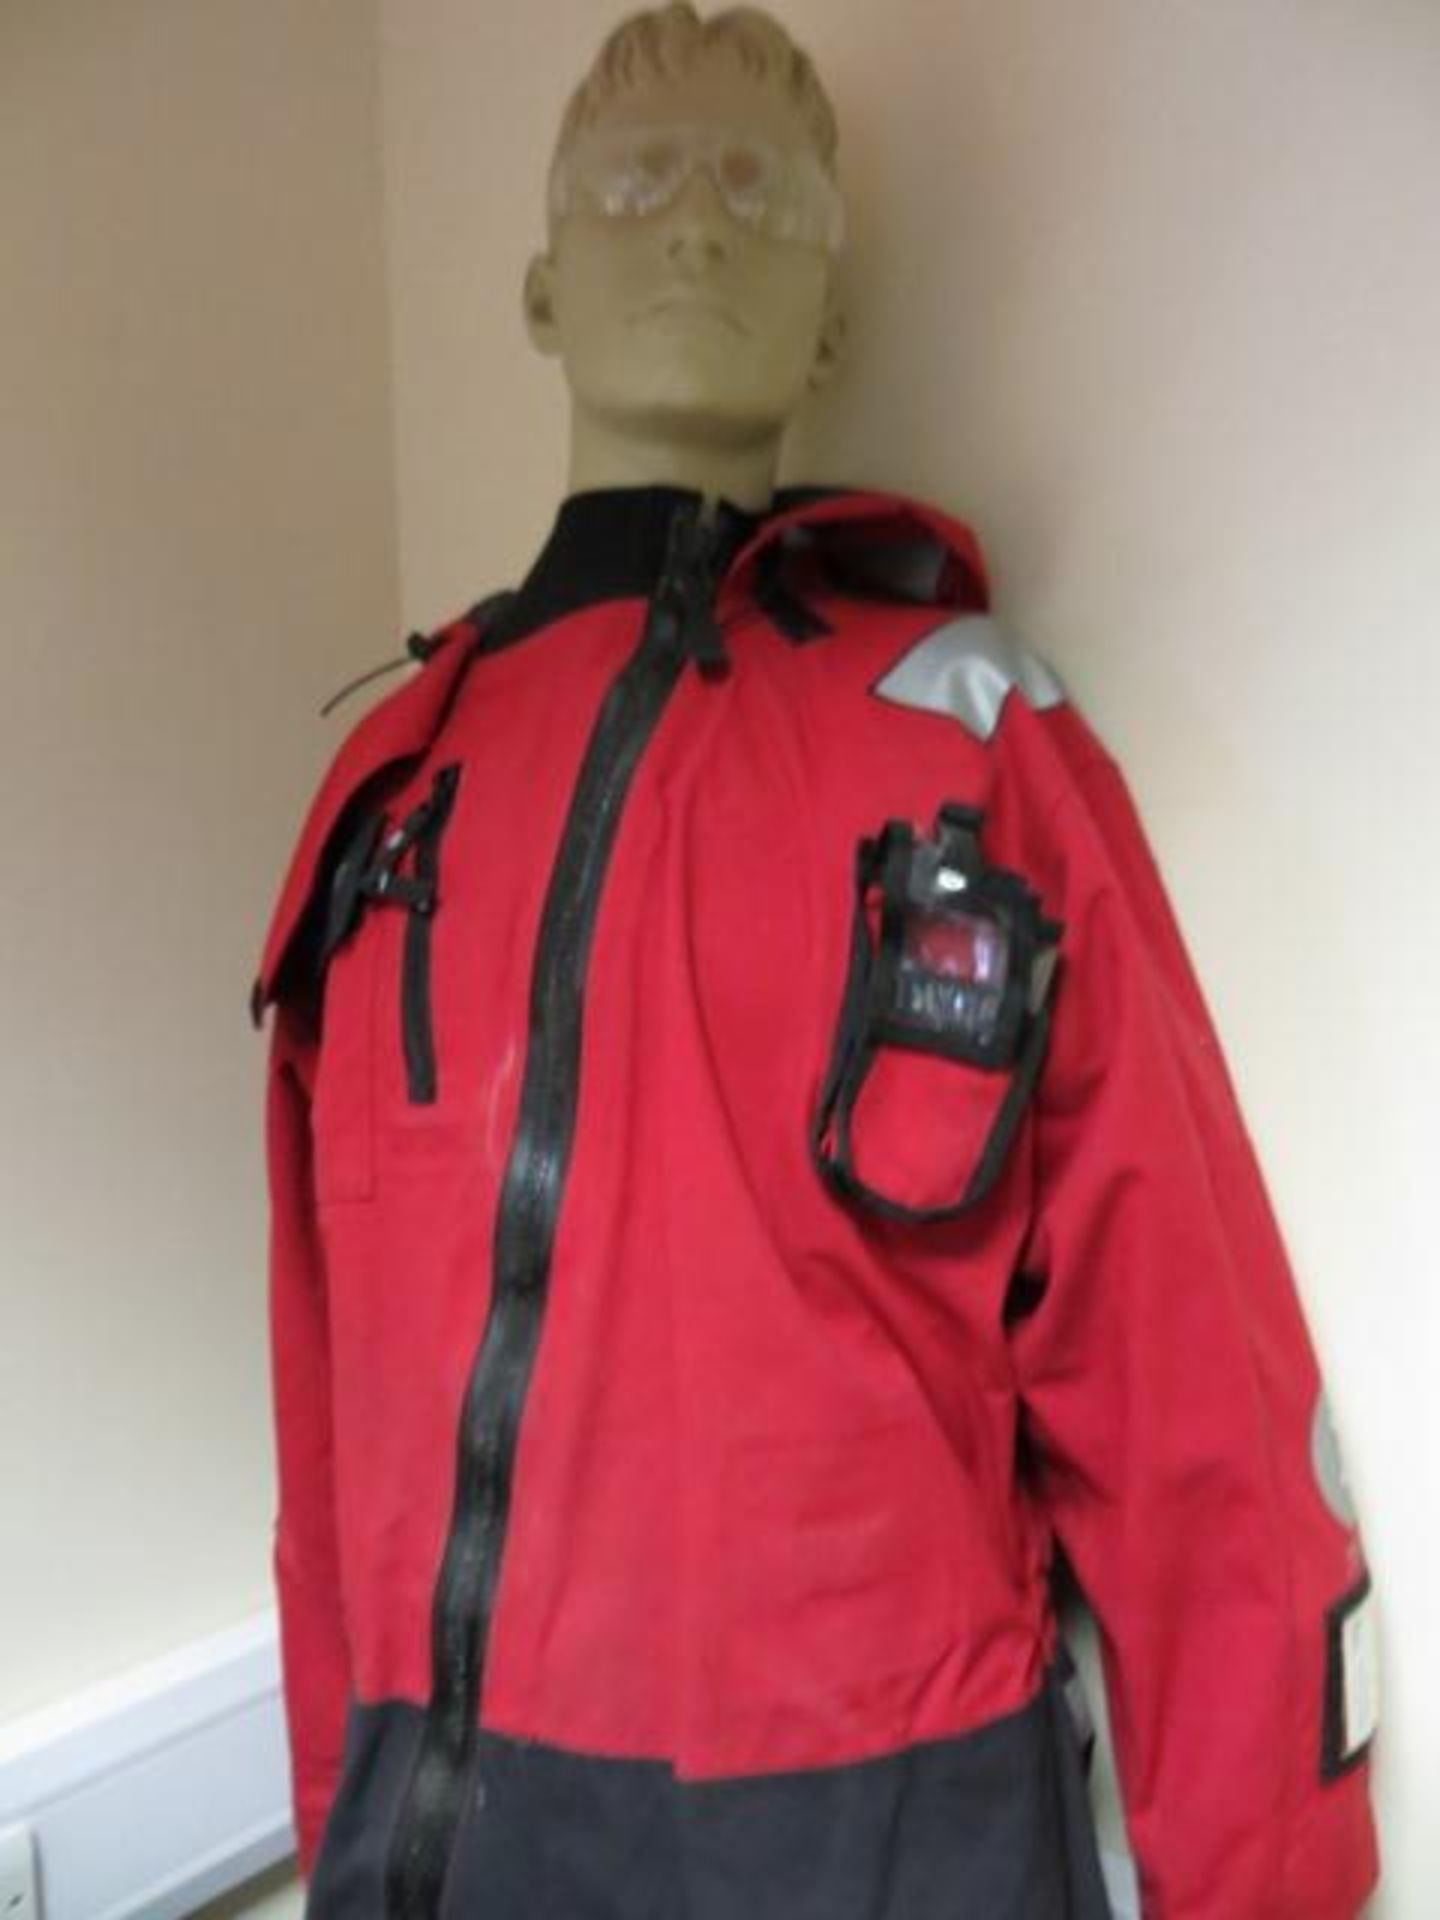 Full Mannequin with Winter H Breathable Transit Suit* This lot is located at Unit 15, Horizon - Image 3 of 3